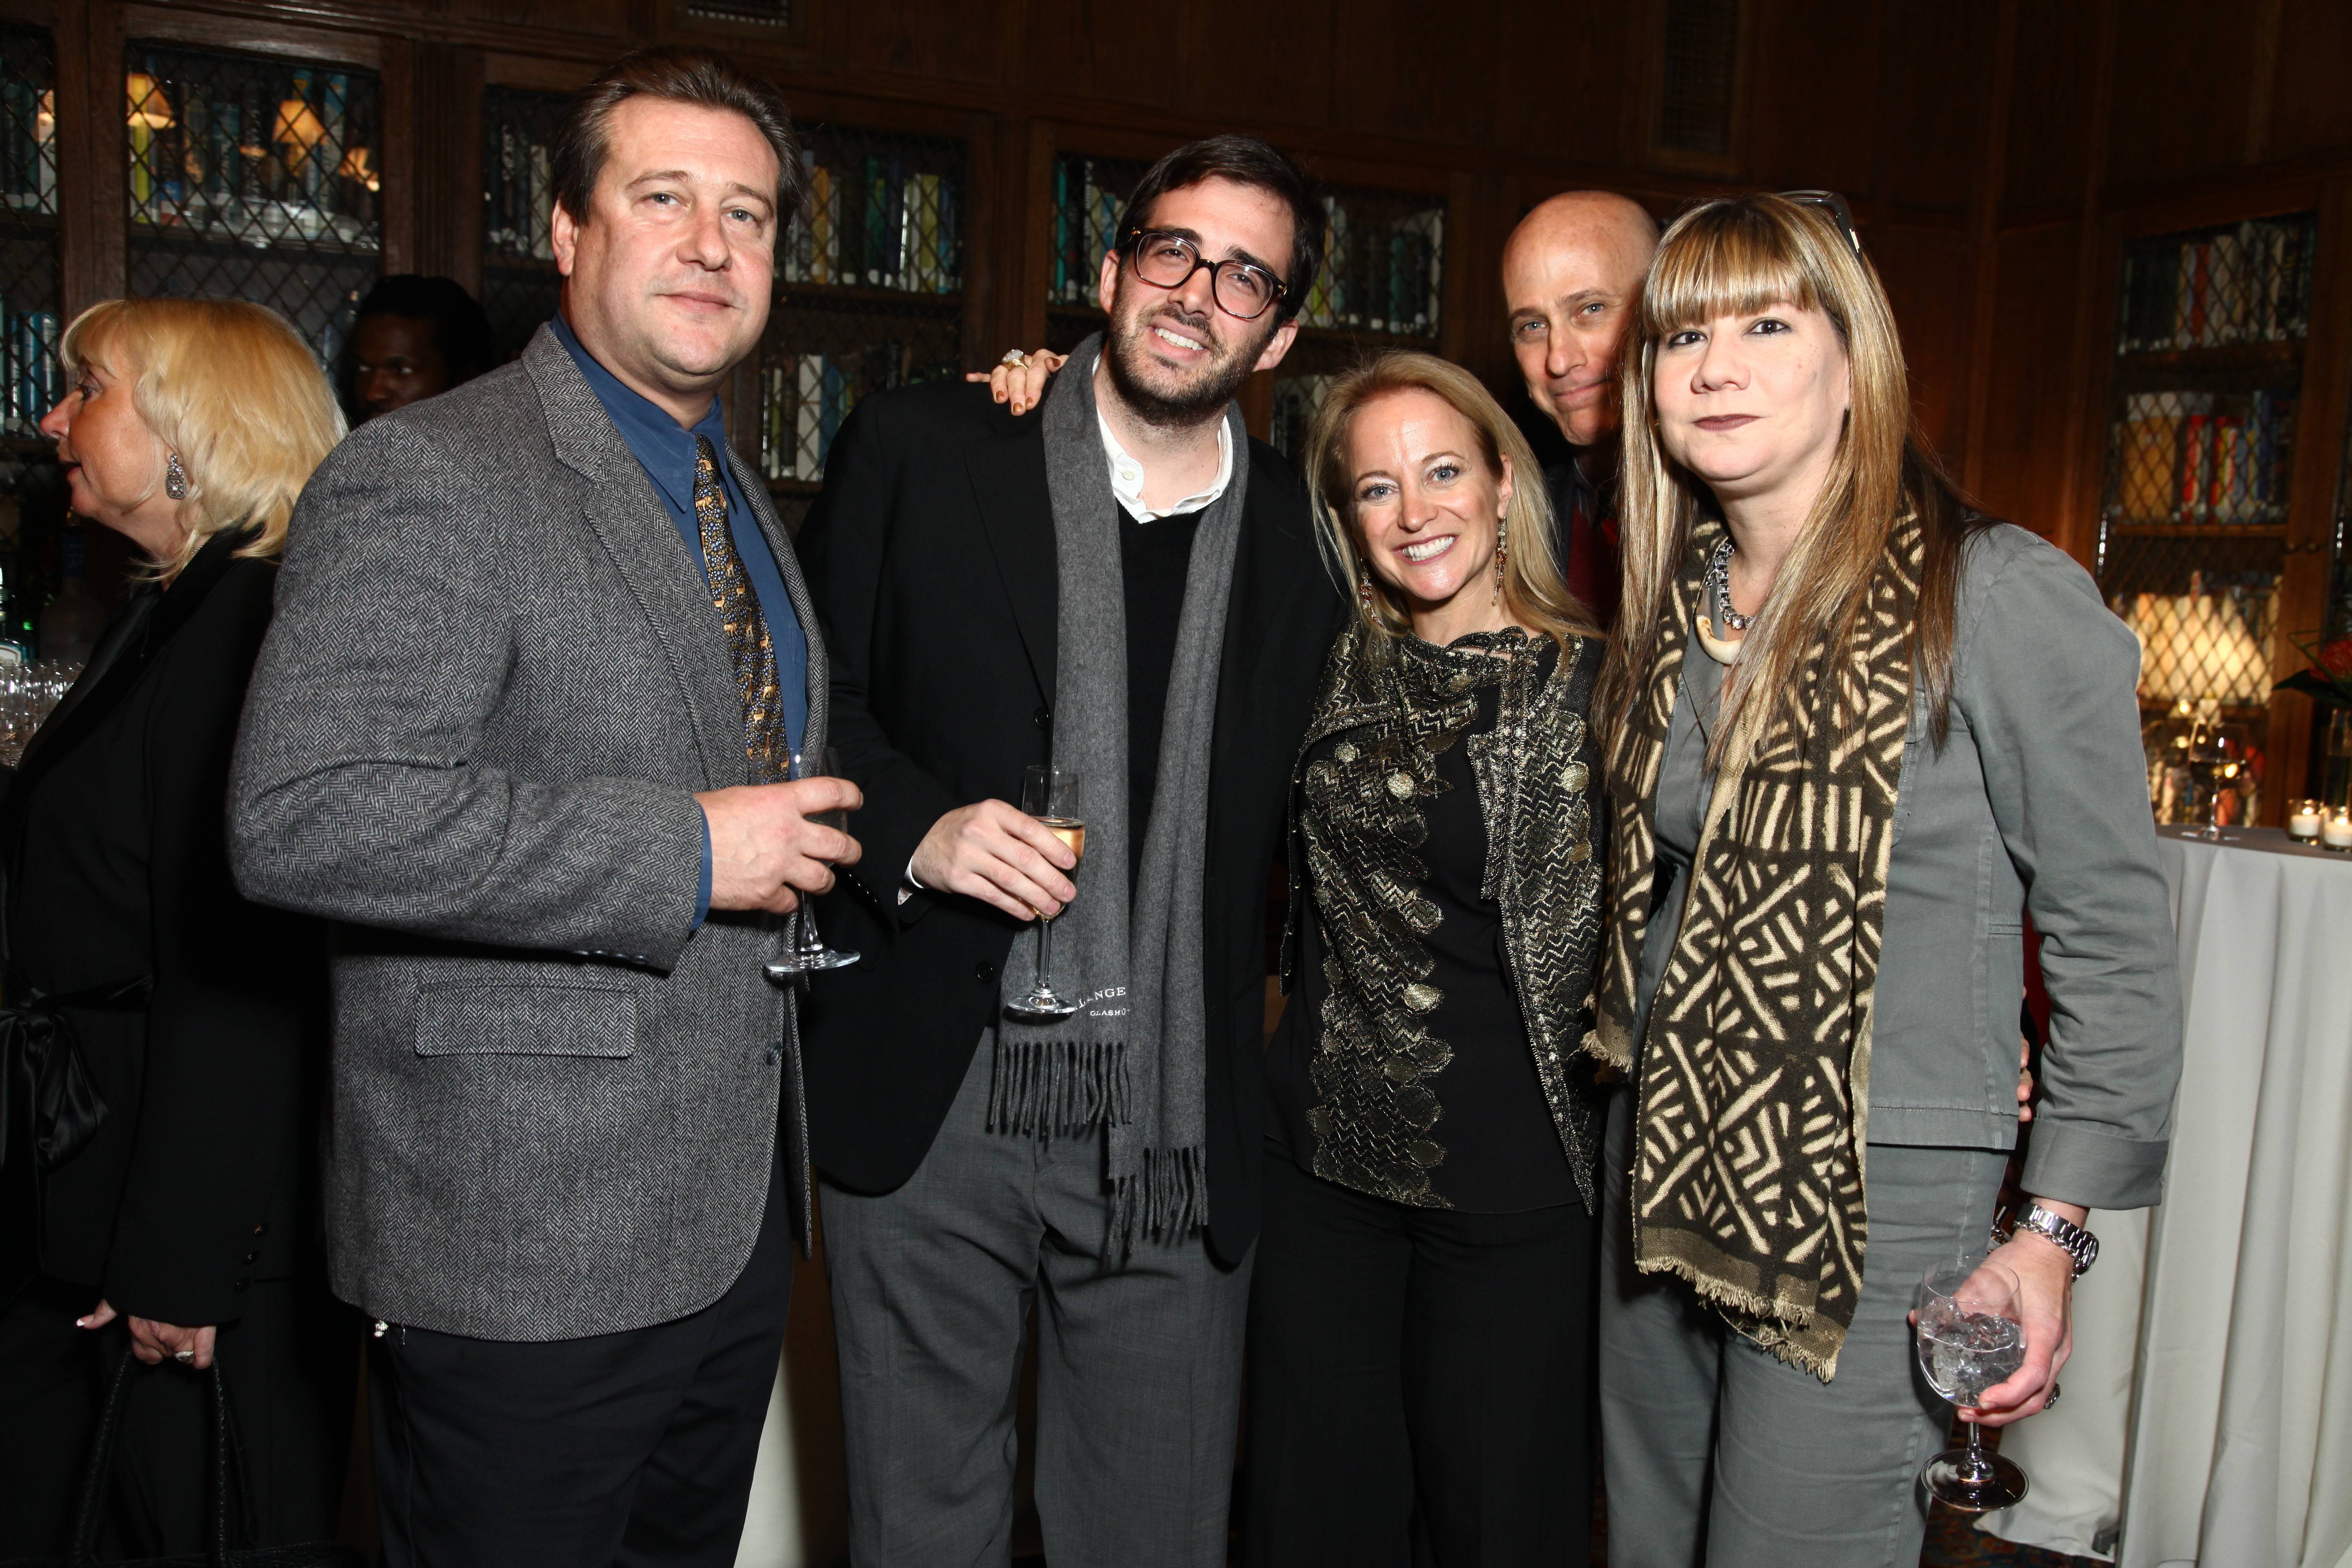 Gary Girvainis, Benjamin Clymer, Michele Gallagher, Mike Thompson, Angela Schuster